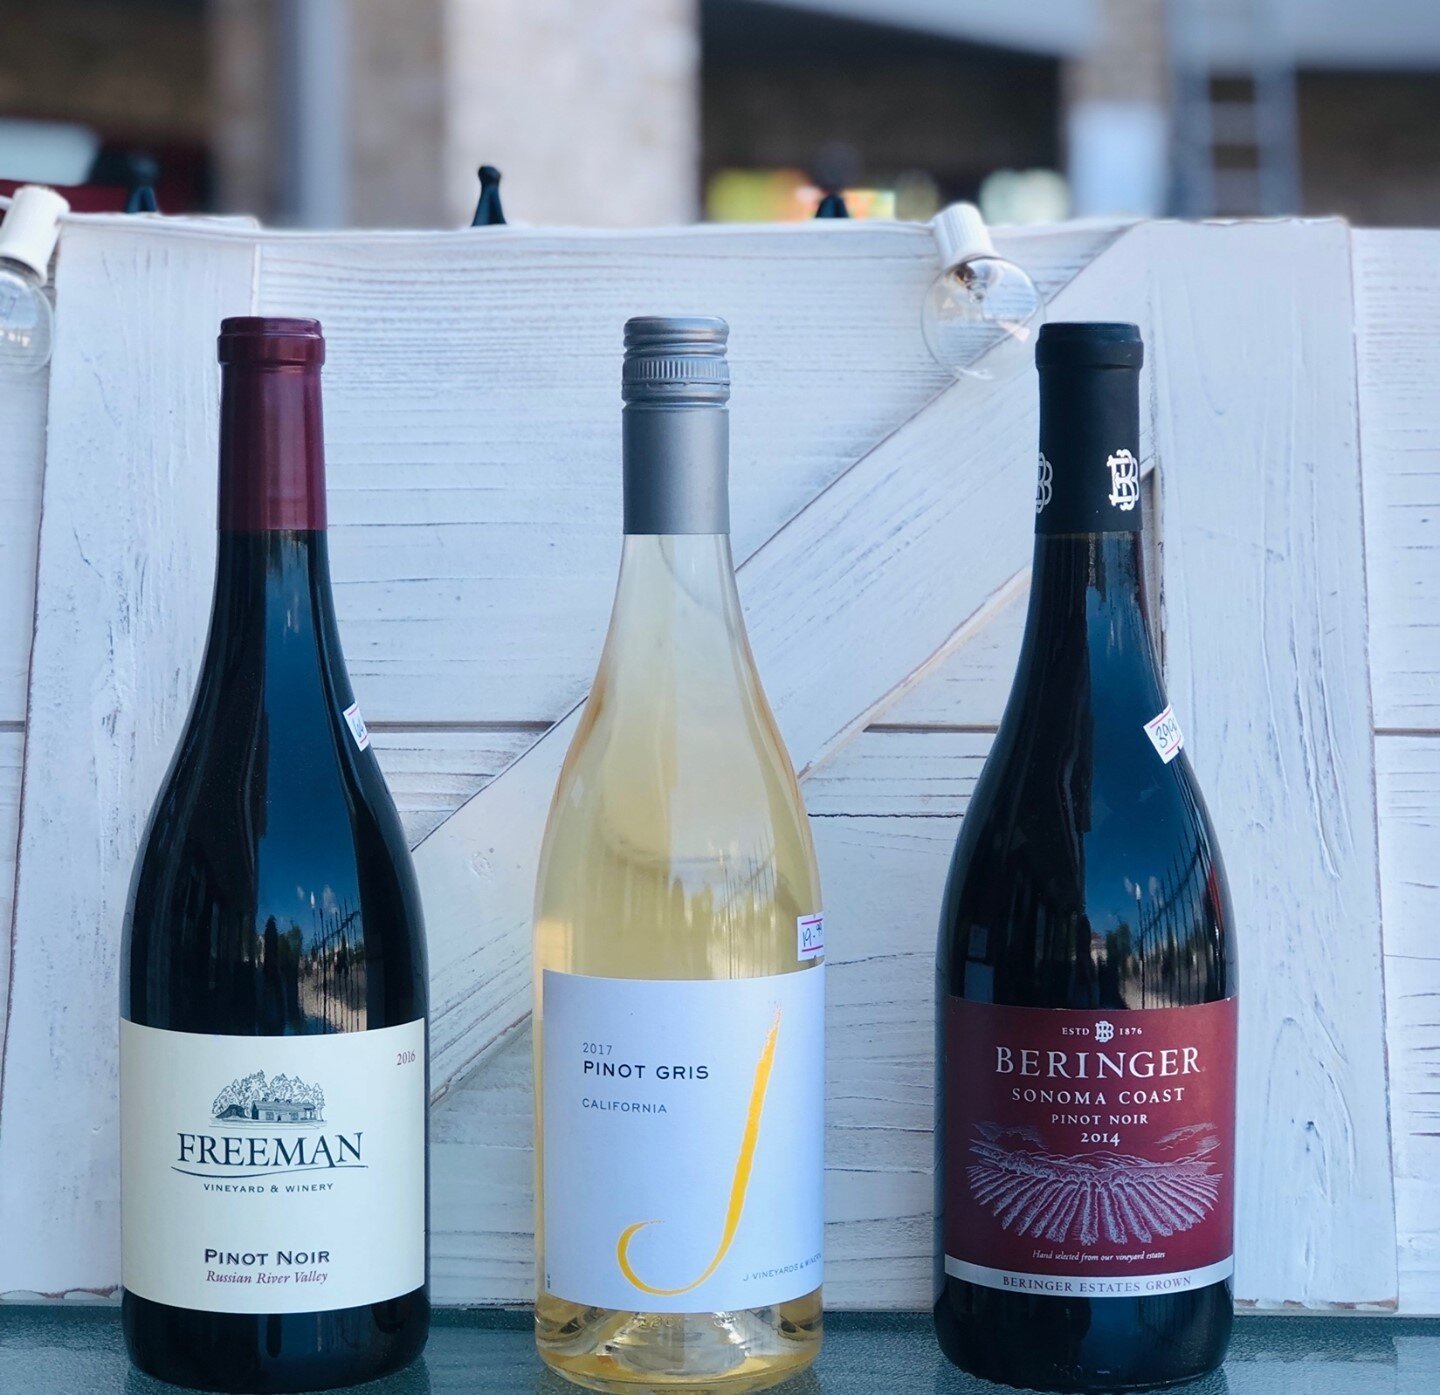 Take away the Monday blues by treating yourself to some wine 🍷

Enjoy 1/2 off select bottles of wine tonight with Bottle Night!